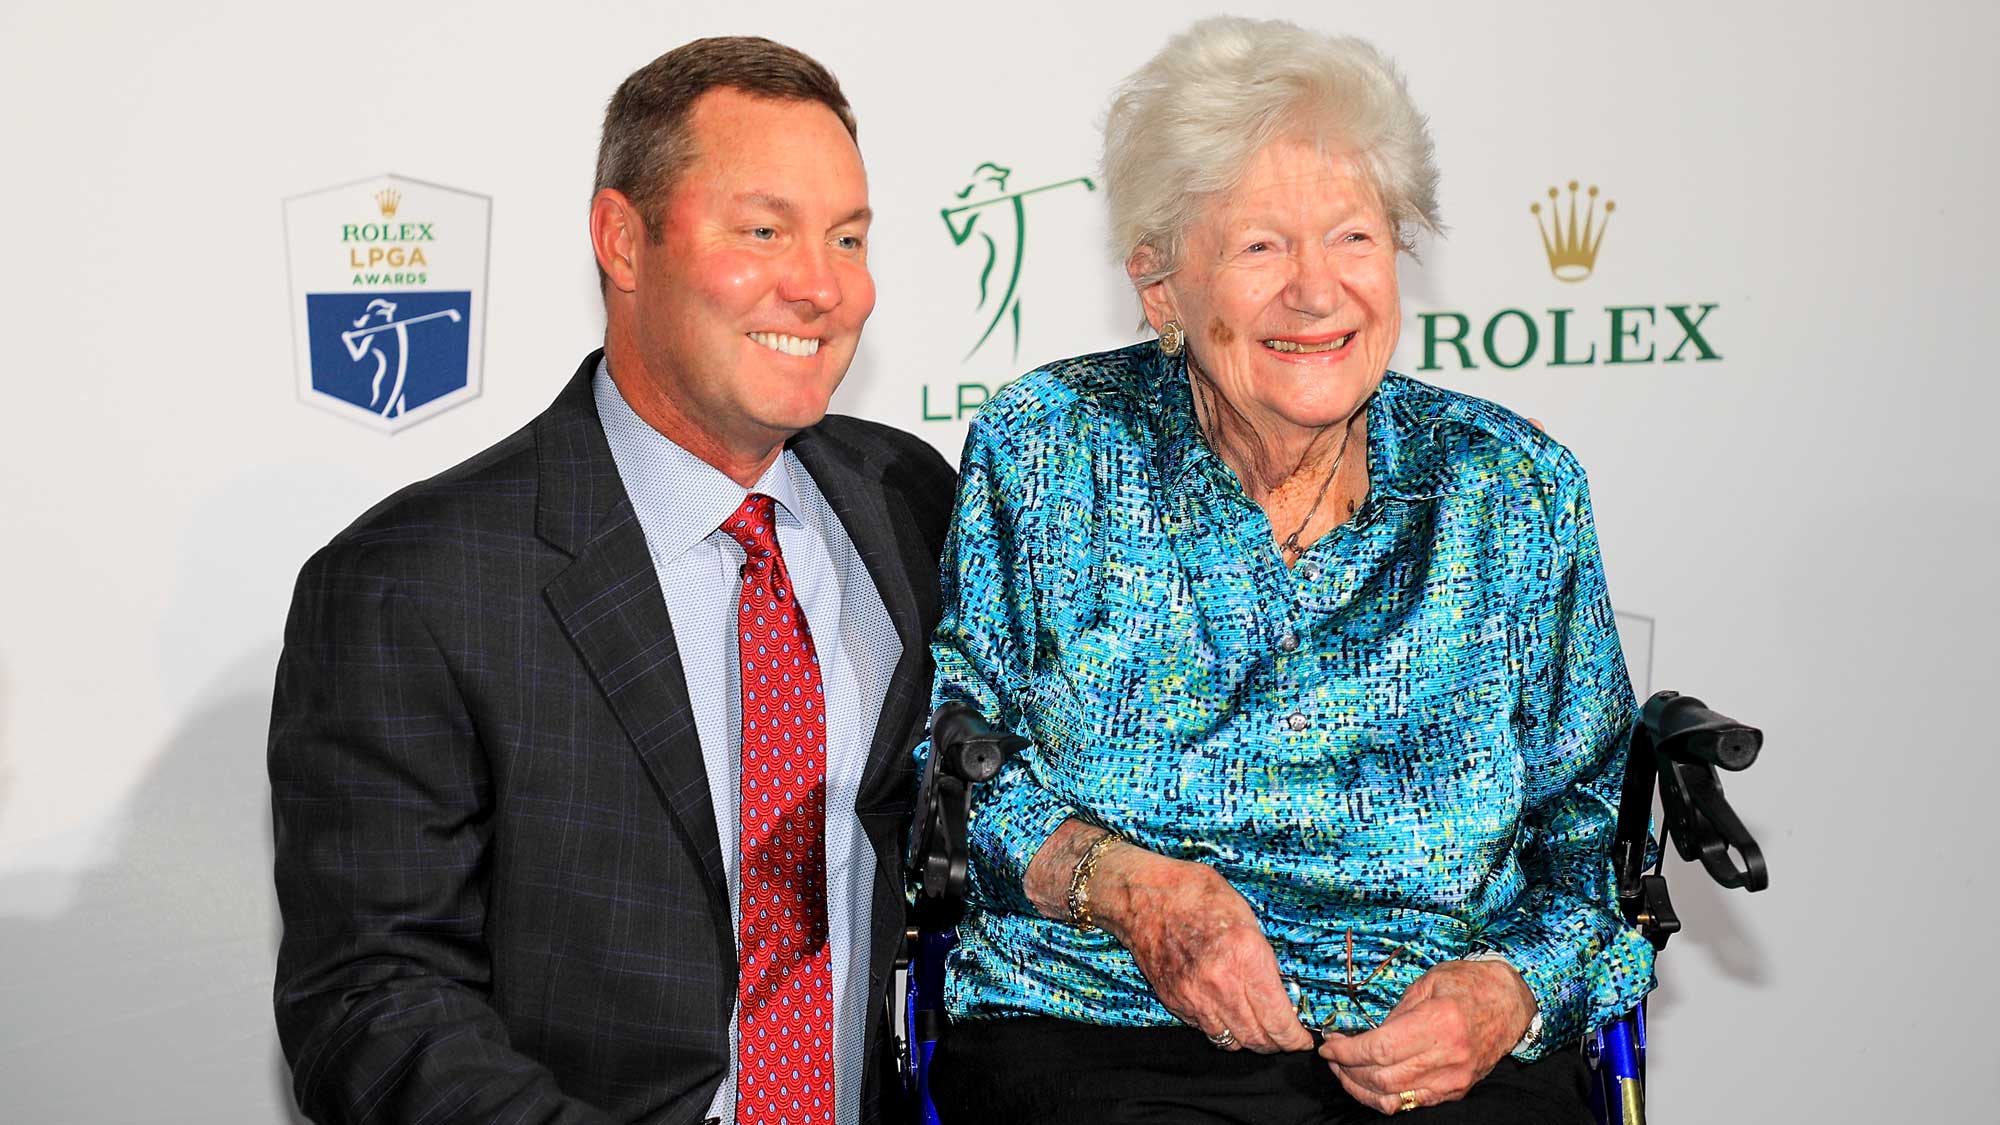 Commissioner Michael Whan (left) poses for a photo with LPGA co-founder Marilynn Smith on the green carpet during the LPGA Rolex Players Awards at the Ritz-Carlton Golf Resort